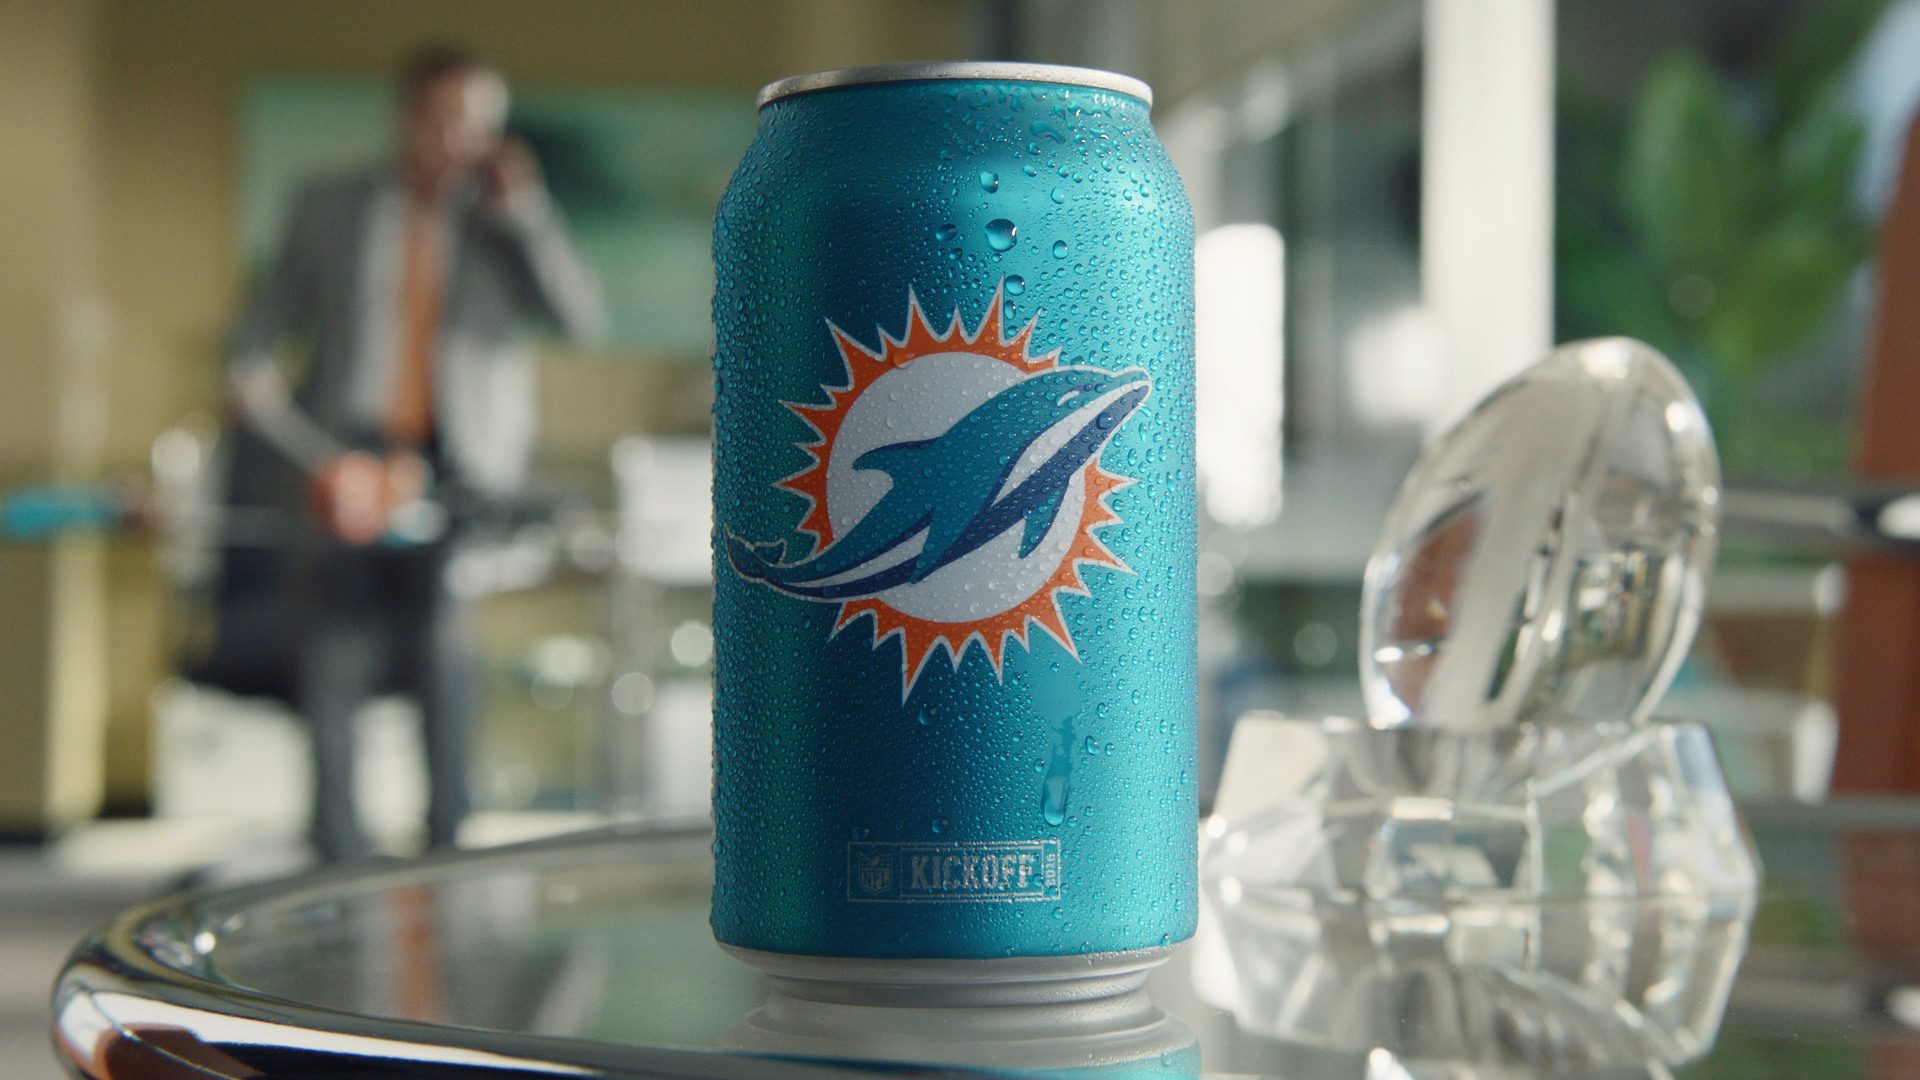 Bud Light Celebrates Fans by Launching TeamSpecific NFL Campaign